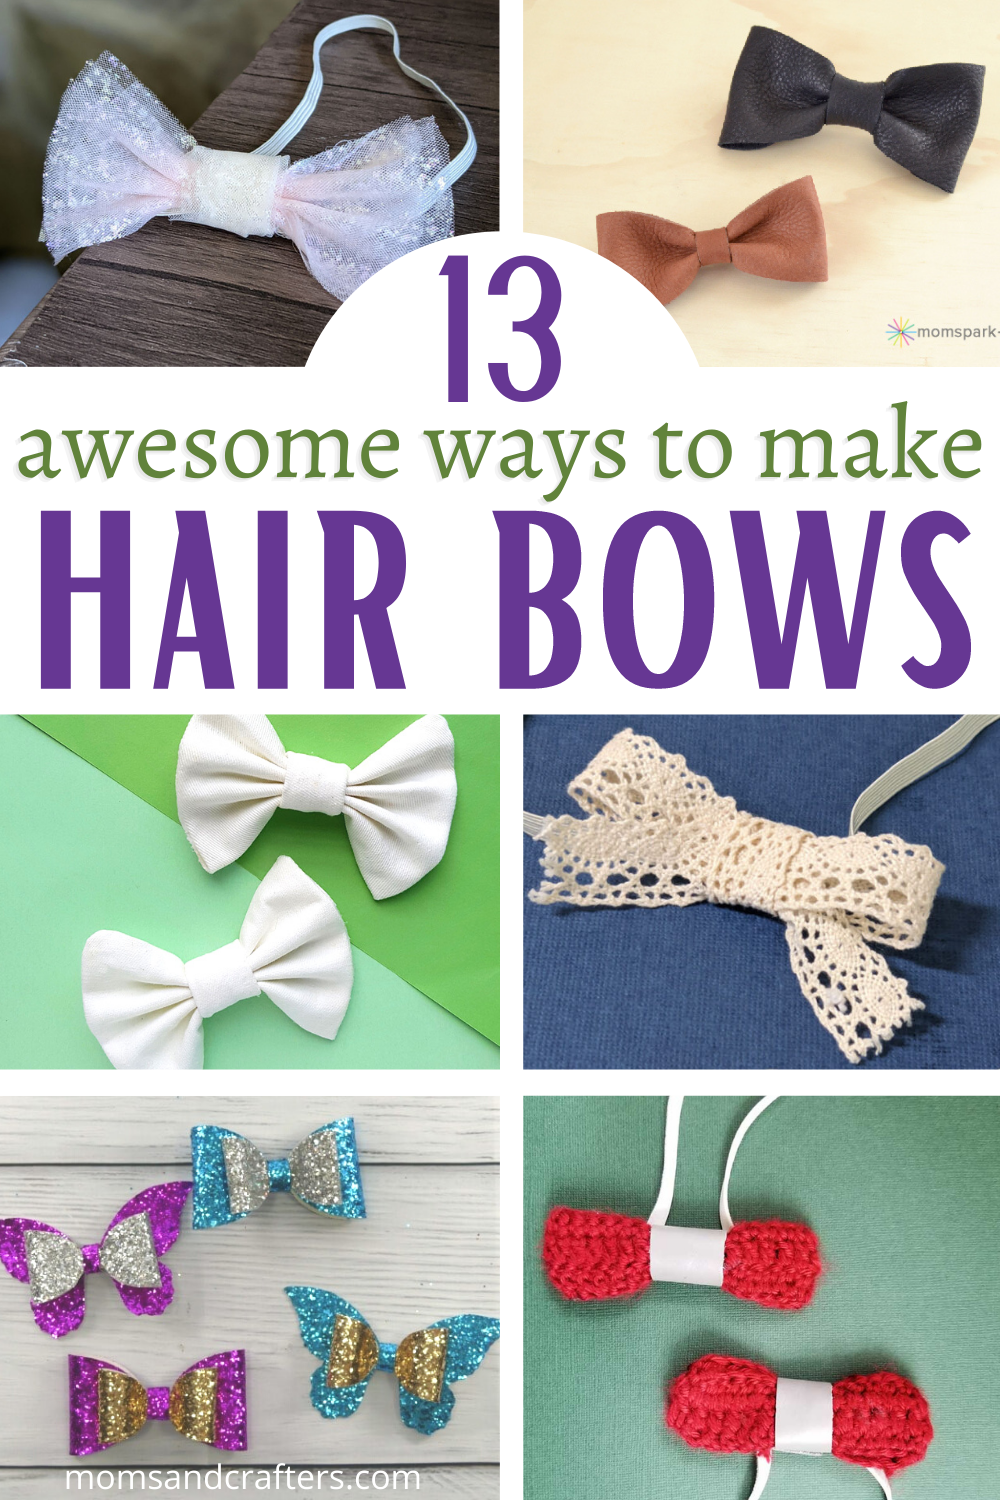 How to make simple easy bow in 1 minute, DIY ribbon bow, Ribbon Hair bow